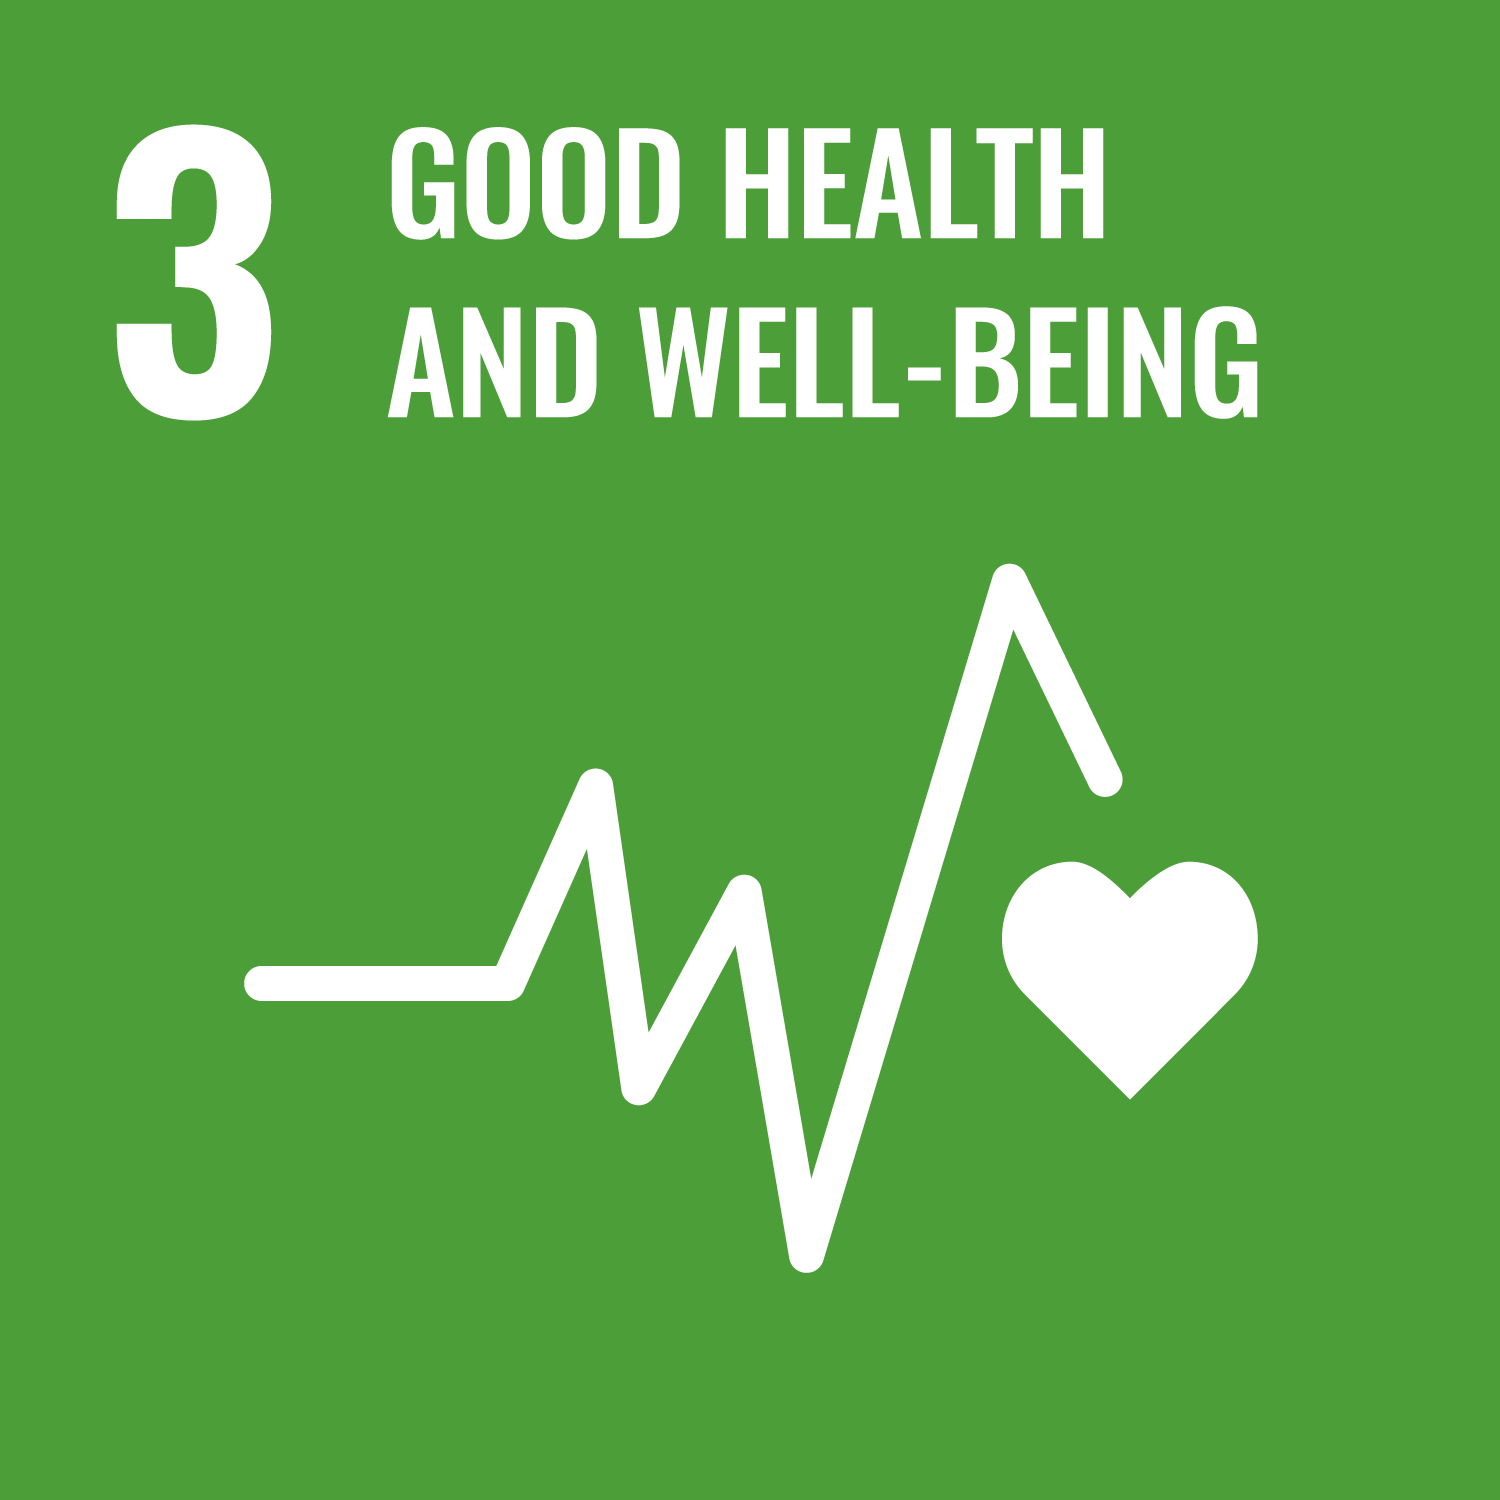 Sustainable Development Goal number 3 - Good Health And Well Being